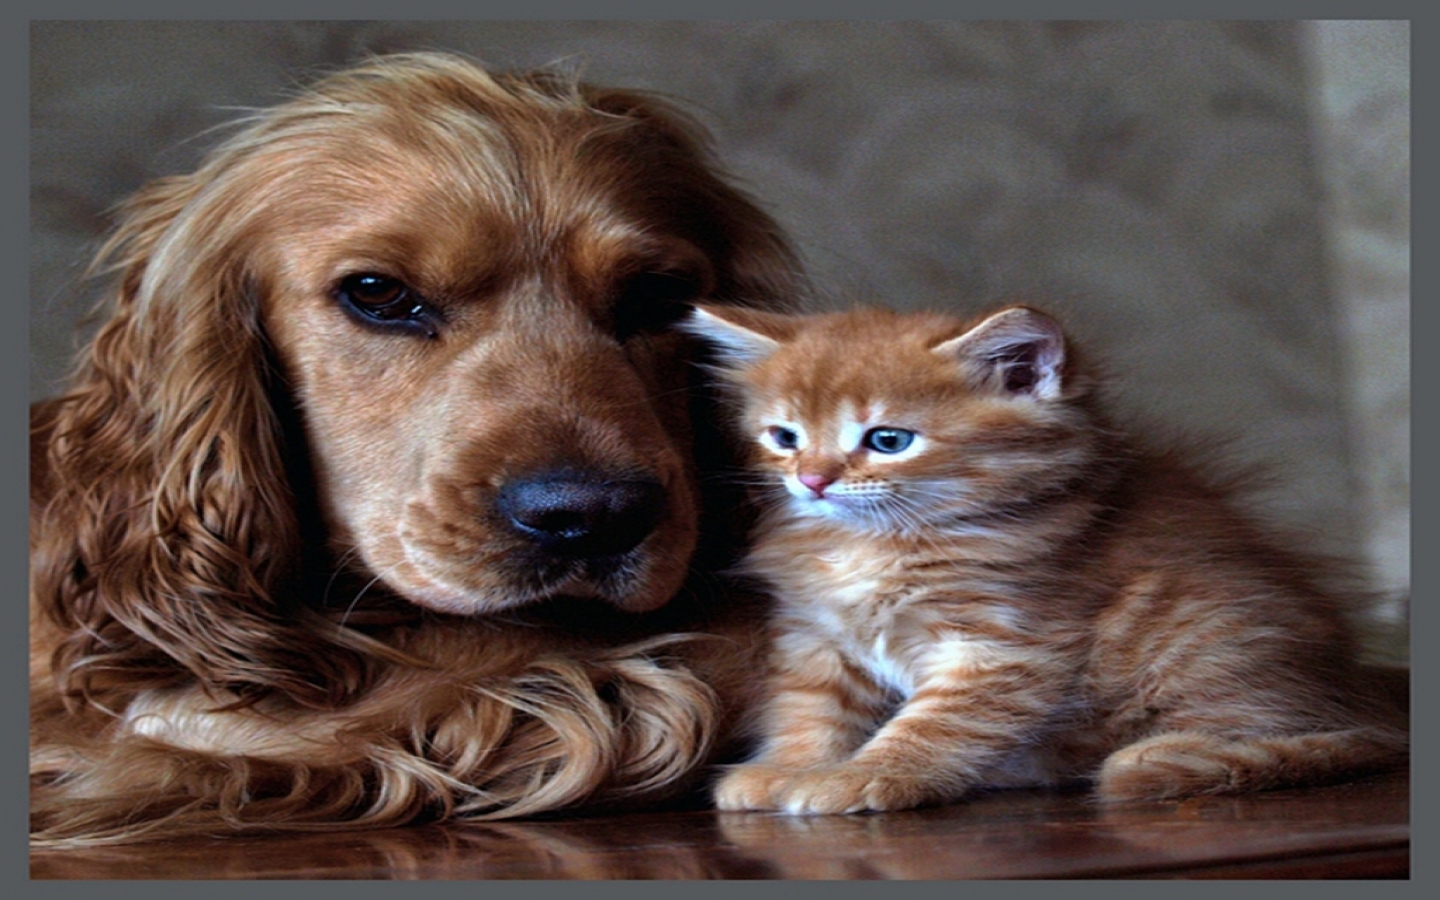 Jpg Right Click To Save Dog And Cat Screensavers HD Wallpaper